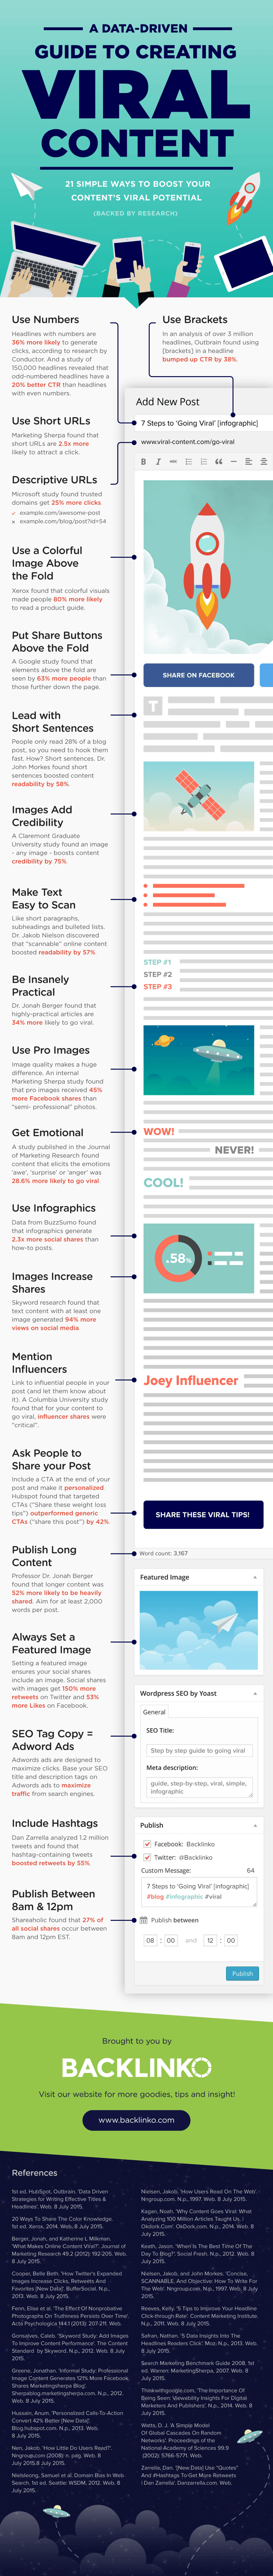 Create-Viral-Content-Using-Data-21-Easy-Steps-Infographic-compressed-.png